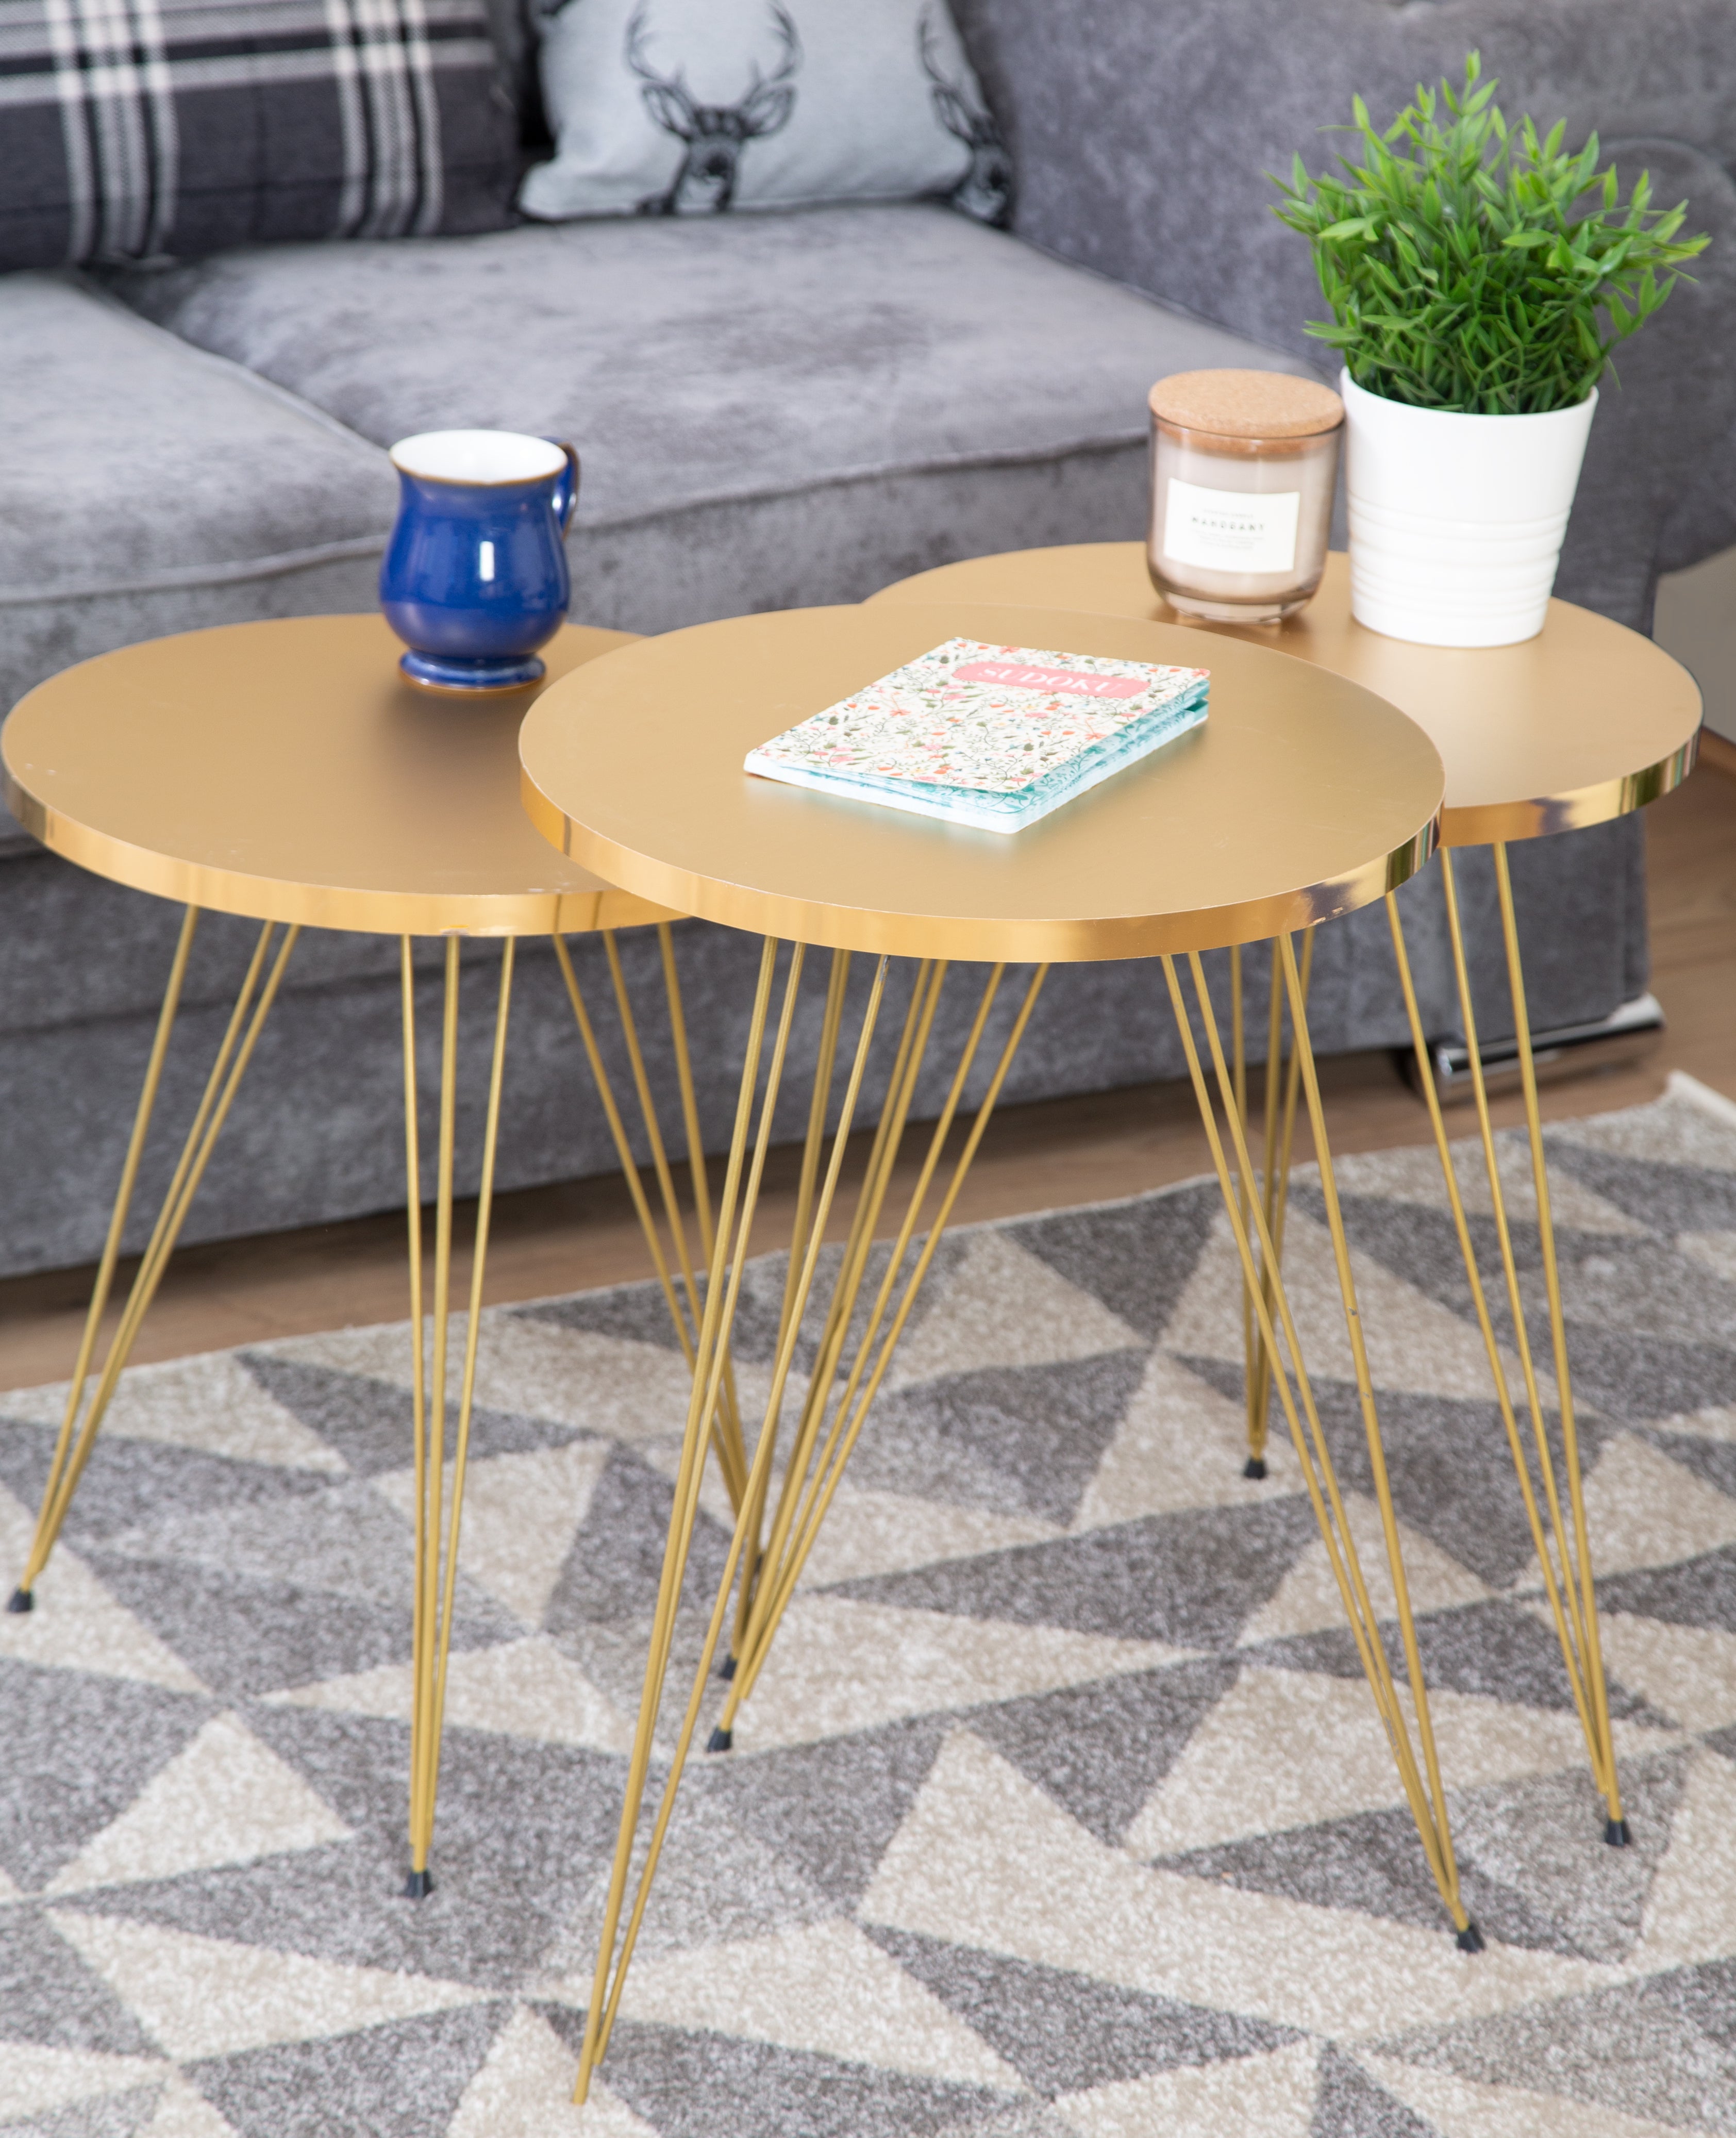 Tigris Set of 3 Round Side Tables - Gold